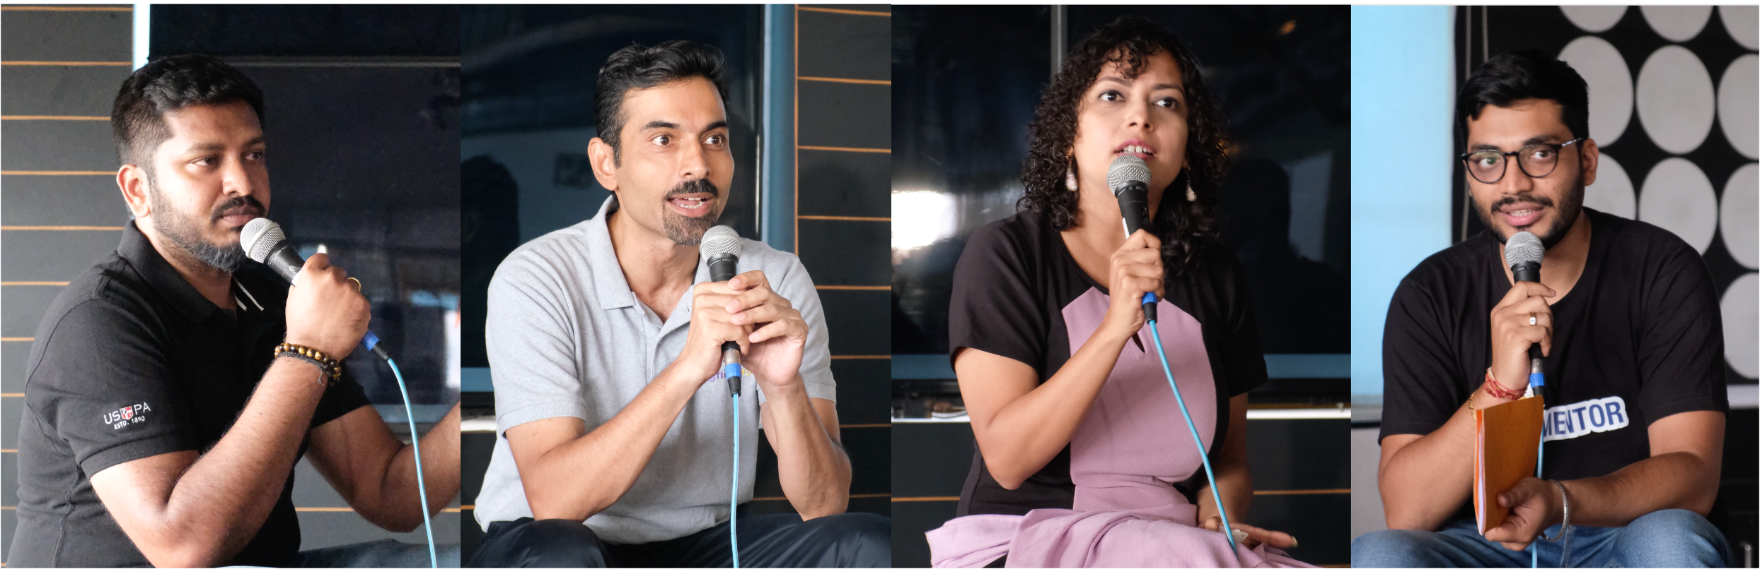 Panelists at a customer success event delivering speech